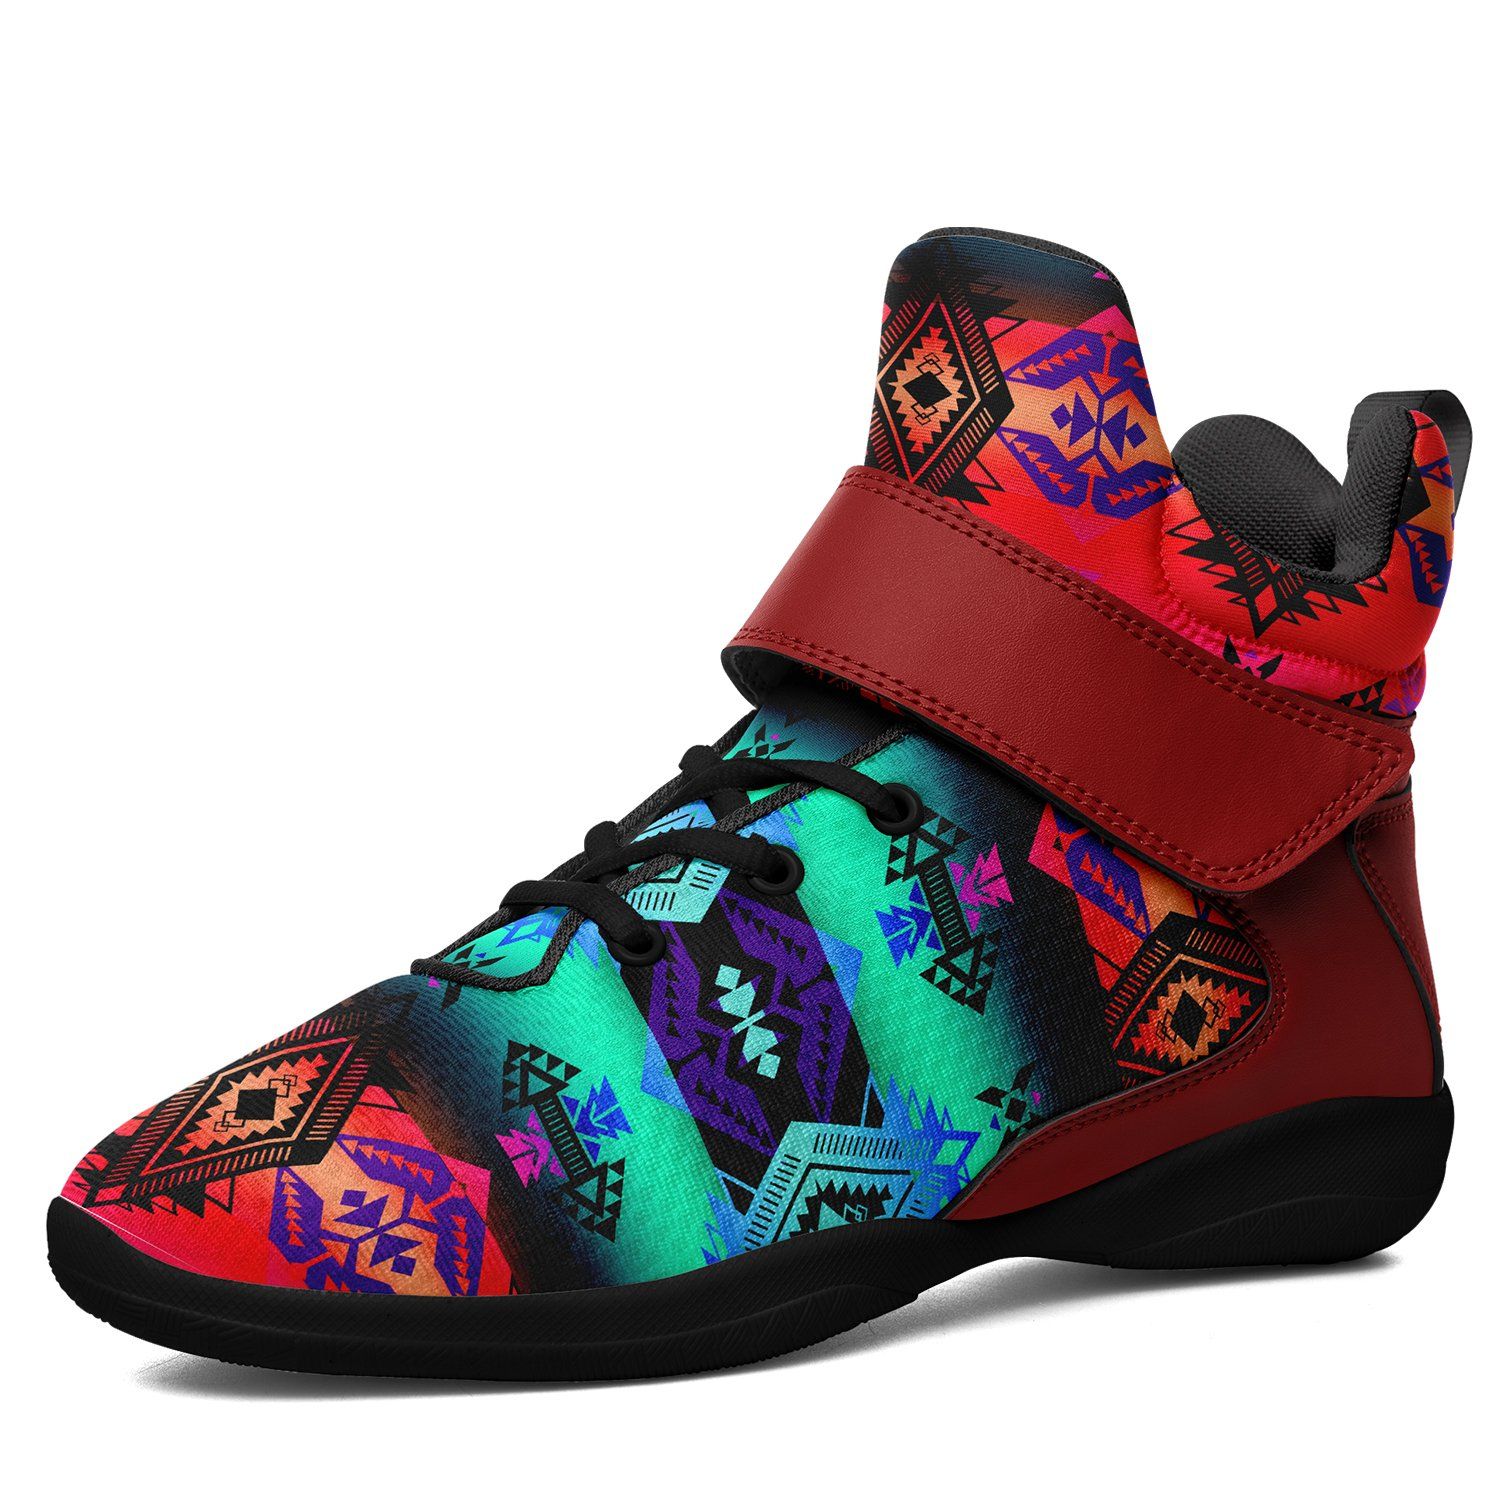 Sovereign Nation Sunrise Ipottaa Basketball / Sport High Top Shoes 49 Dzine US Women 4.5 / US Youth 3.5 / EUR 35 Black Sole with Red Strap 